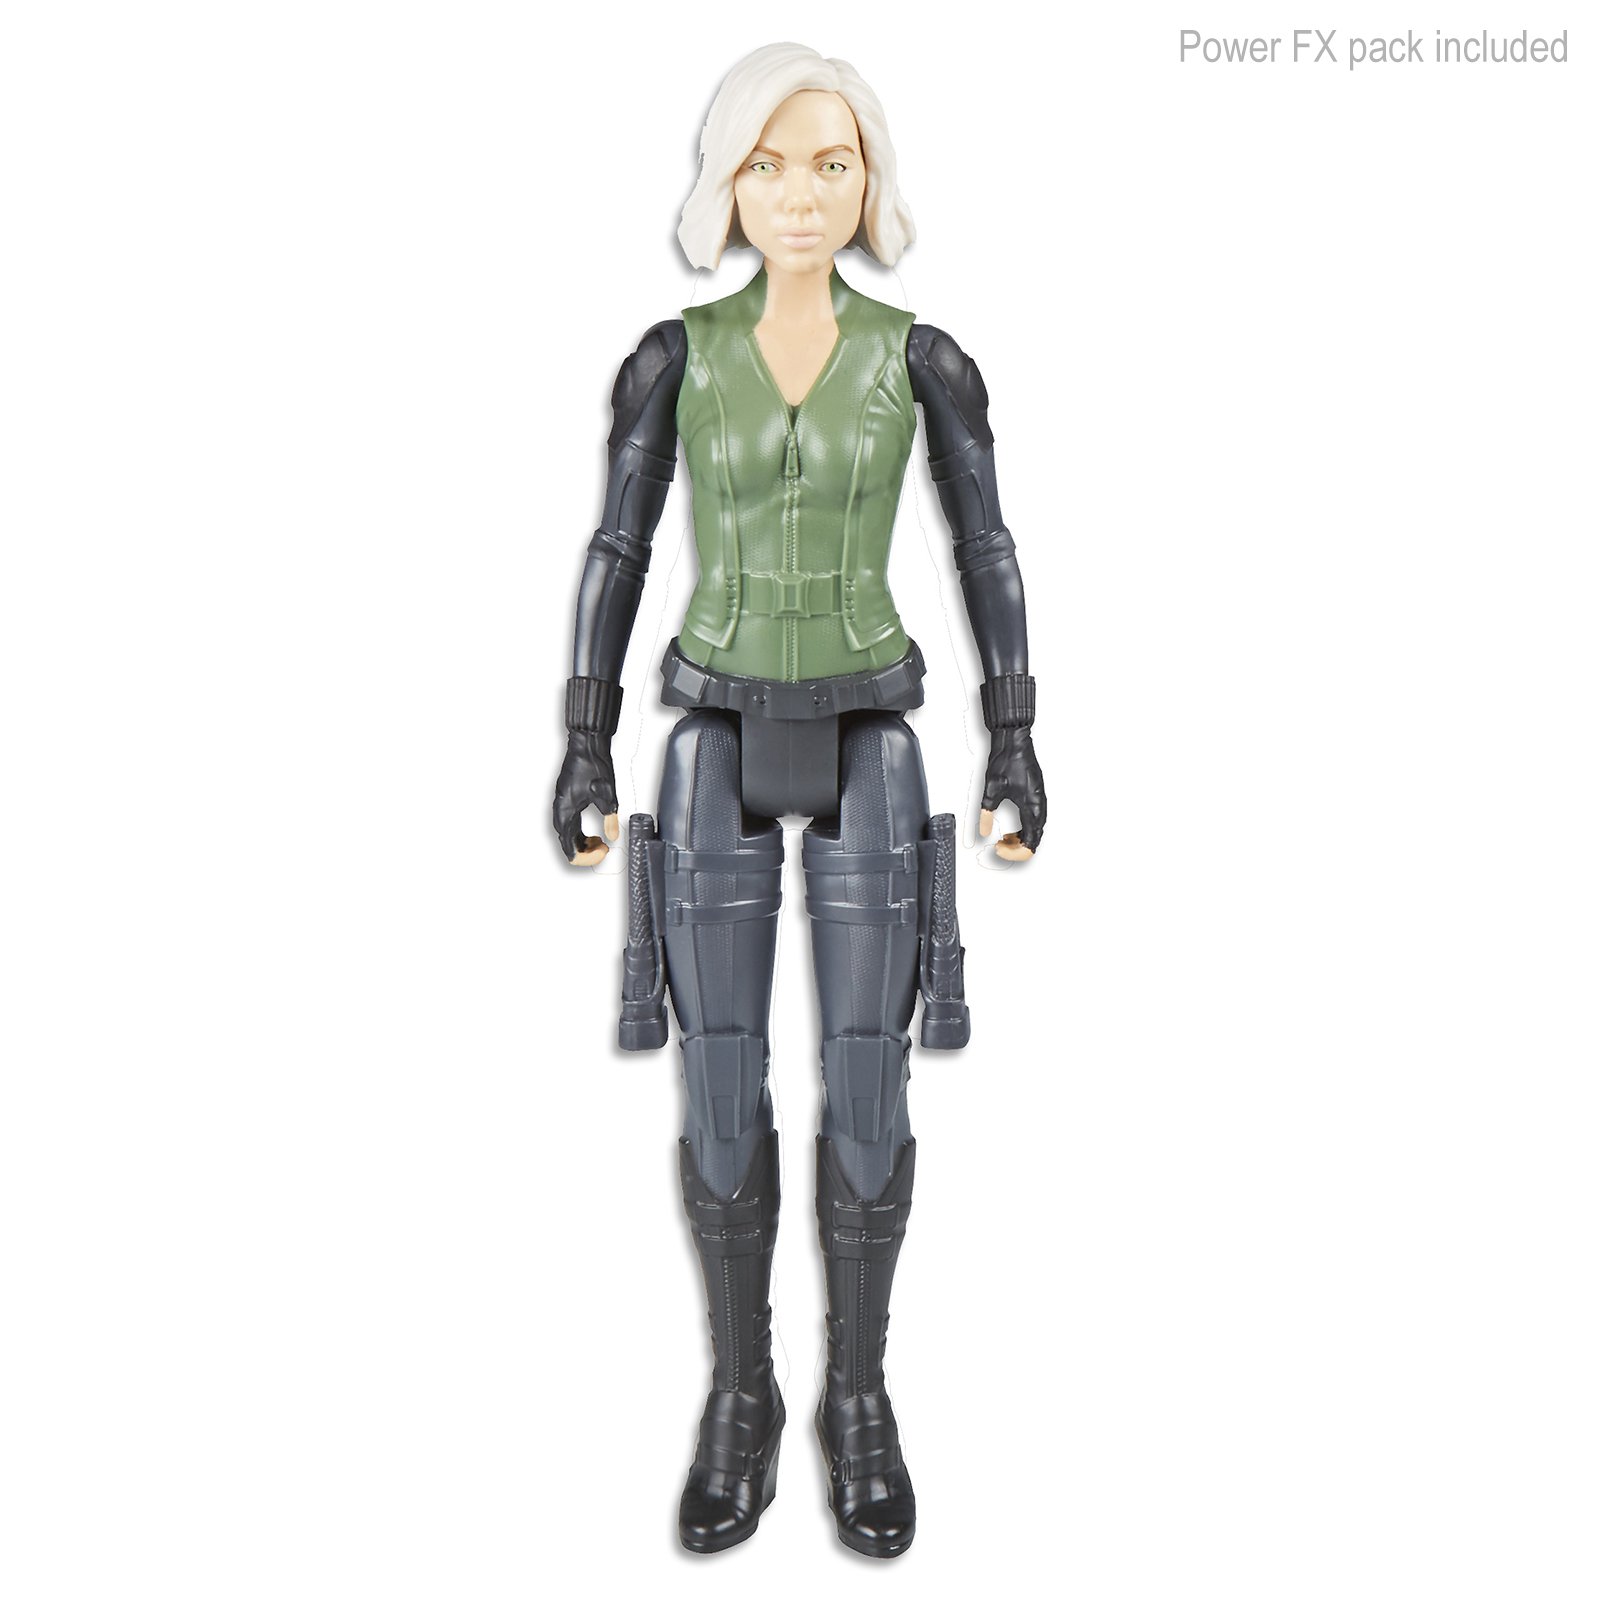 Avengers Marvel Infinity War Titan Hero Power FX Black Widow Includes figure, pack, accessory, and instructions Ages 4 and up